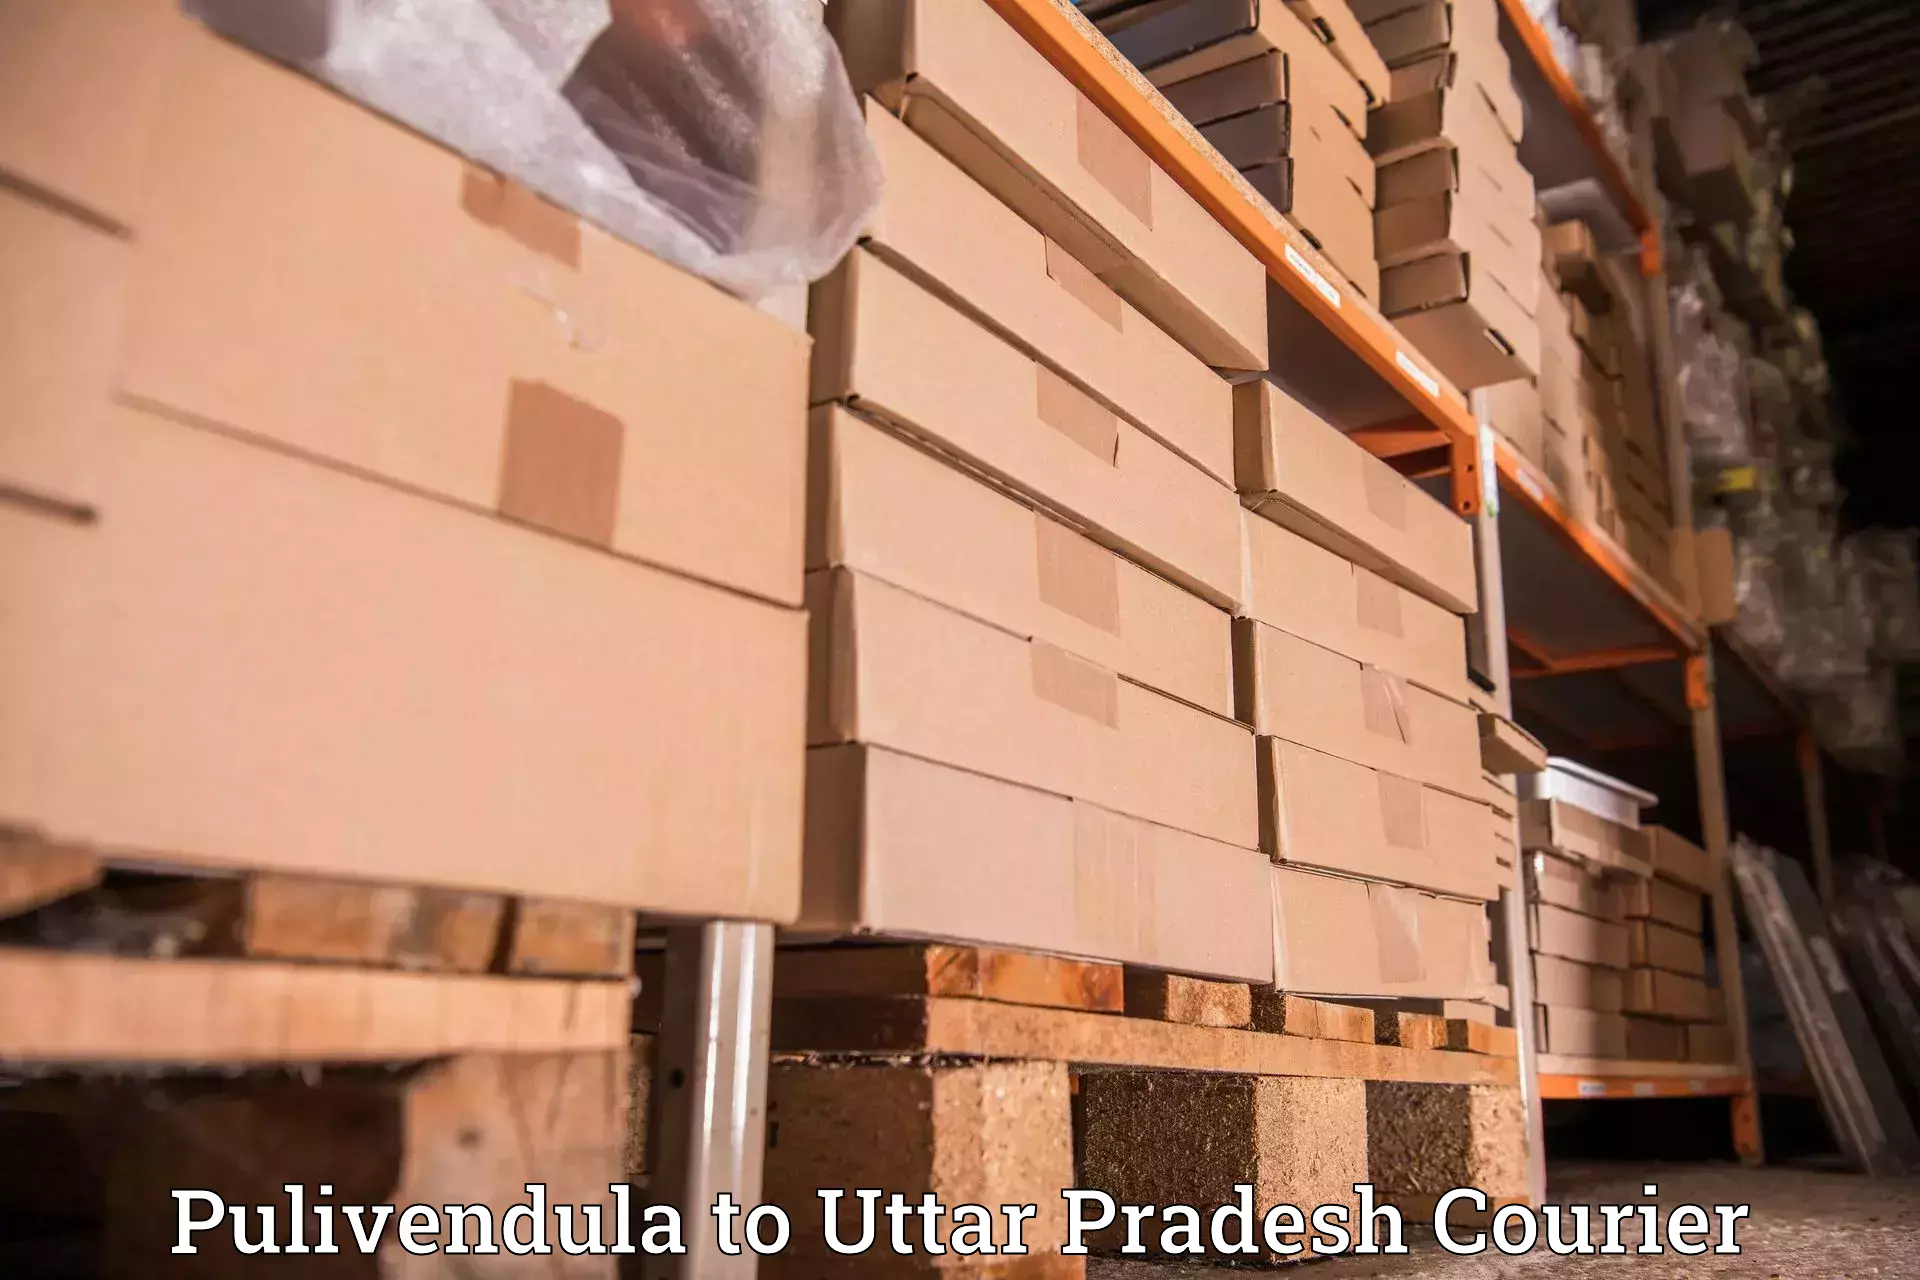 High-speed logistics services Pulivendula to Agra